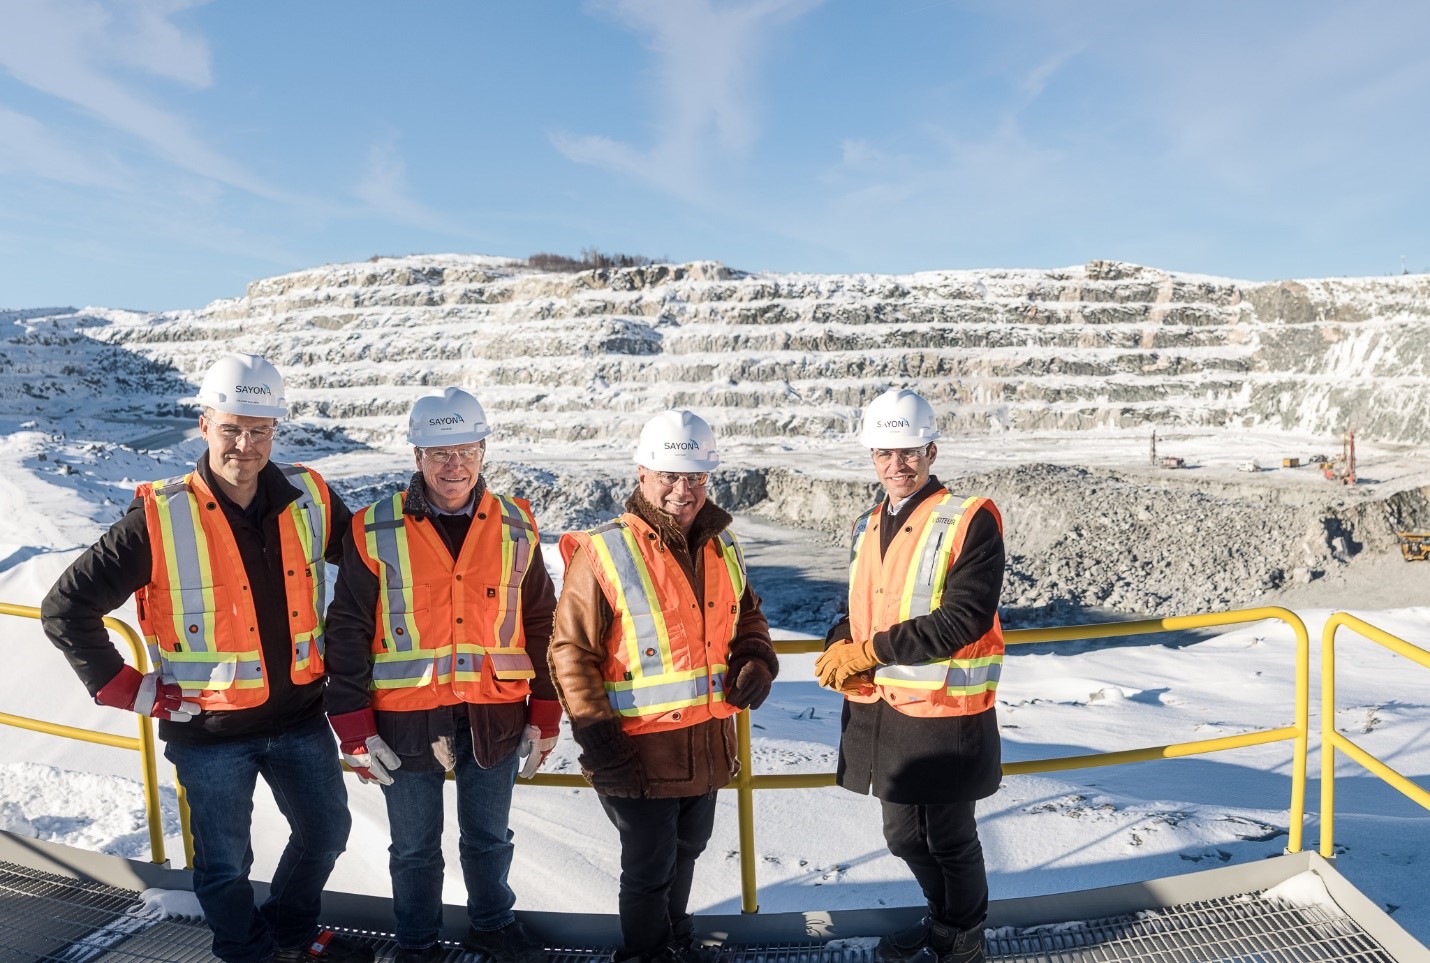 Left to right: Sylvain Collard (Sayona’s Chief Operating Officer), Brett Lynch (Sayona’s Managing Director), Stan Bharti (Jourdan’s Director) and Rene Bharti (Jourdan’s CEO) at the NAL open pit mine.